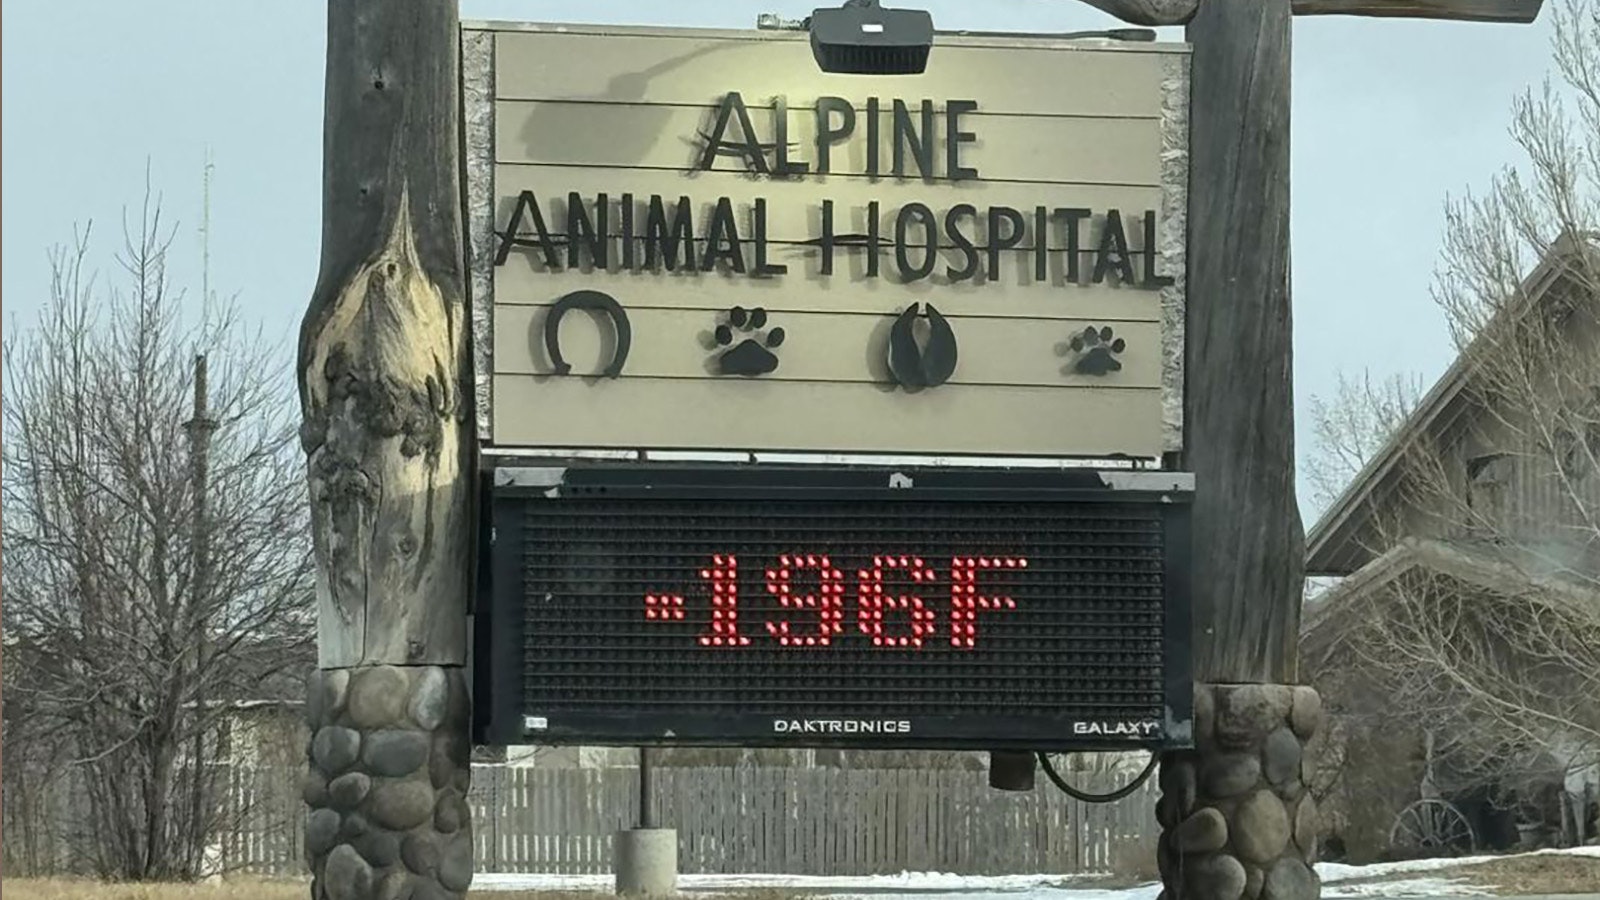 Let's hope temperatures don't drop as low as the sign at Alpine Animal Hospital in Laramie, Wyoming, predicts.